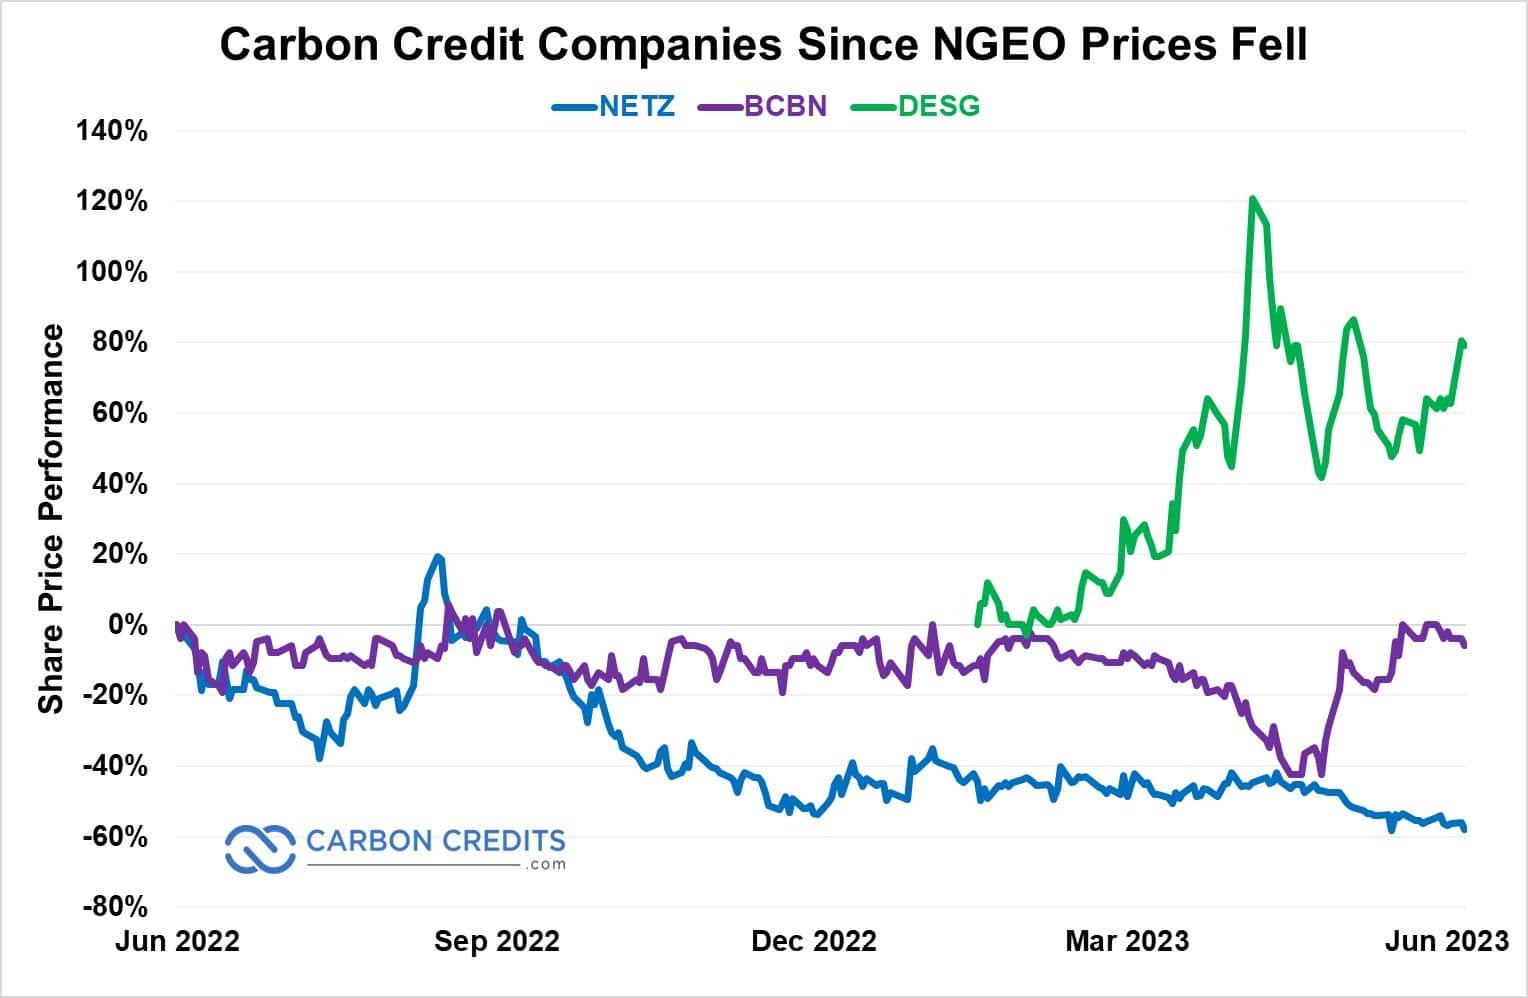 carbon credit companies affected by NGEO prices